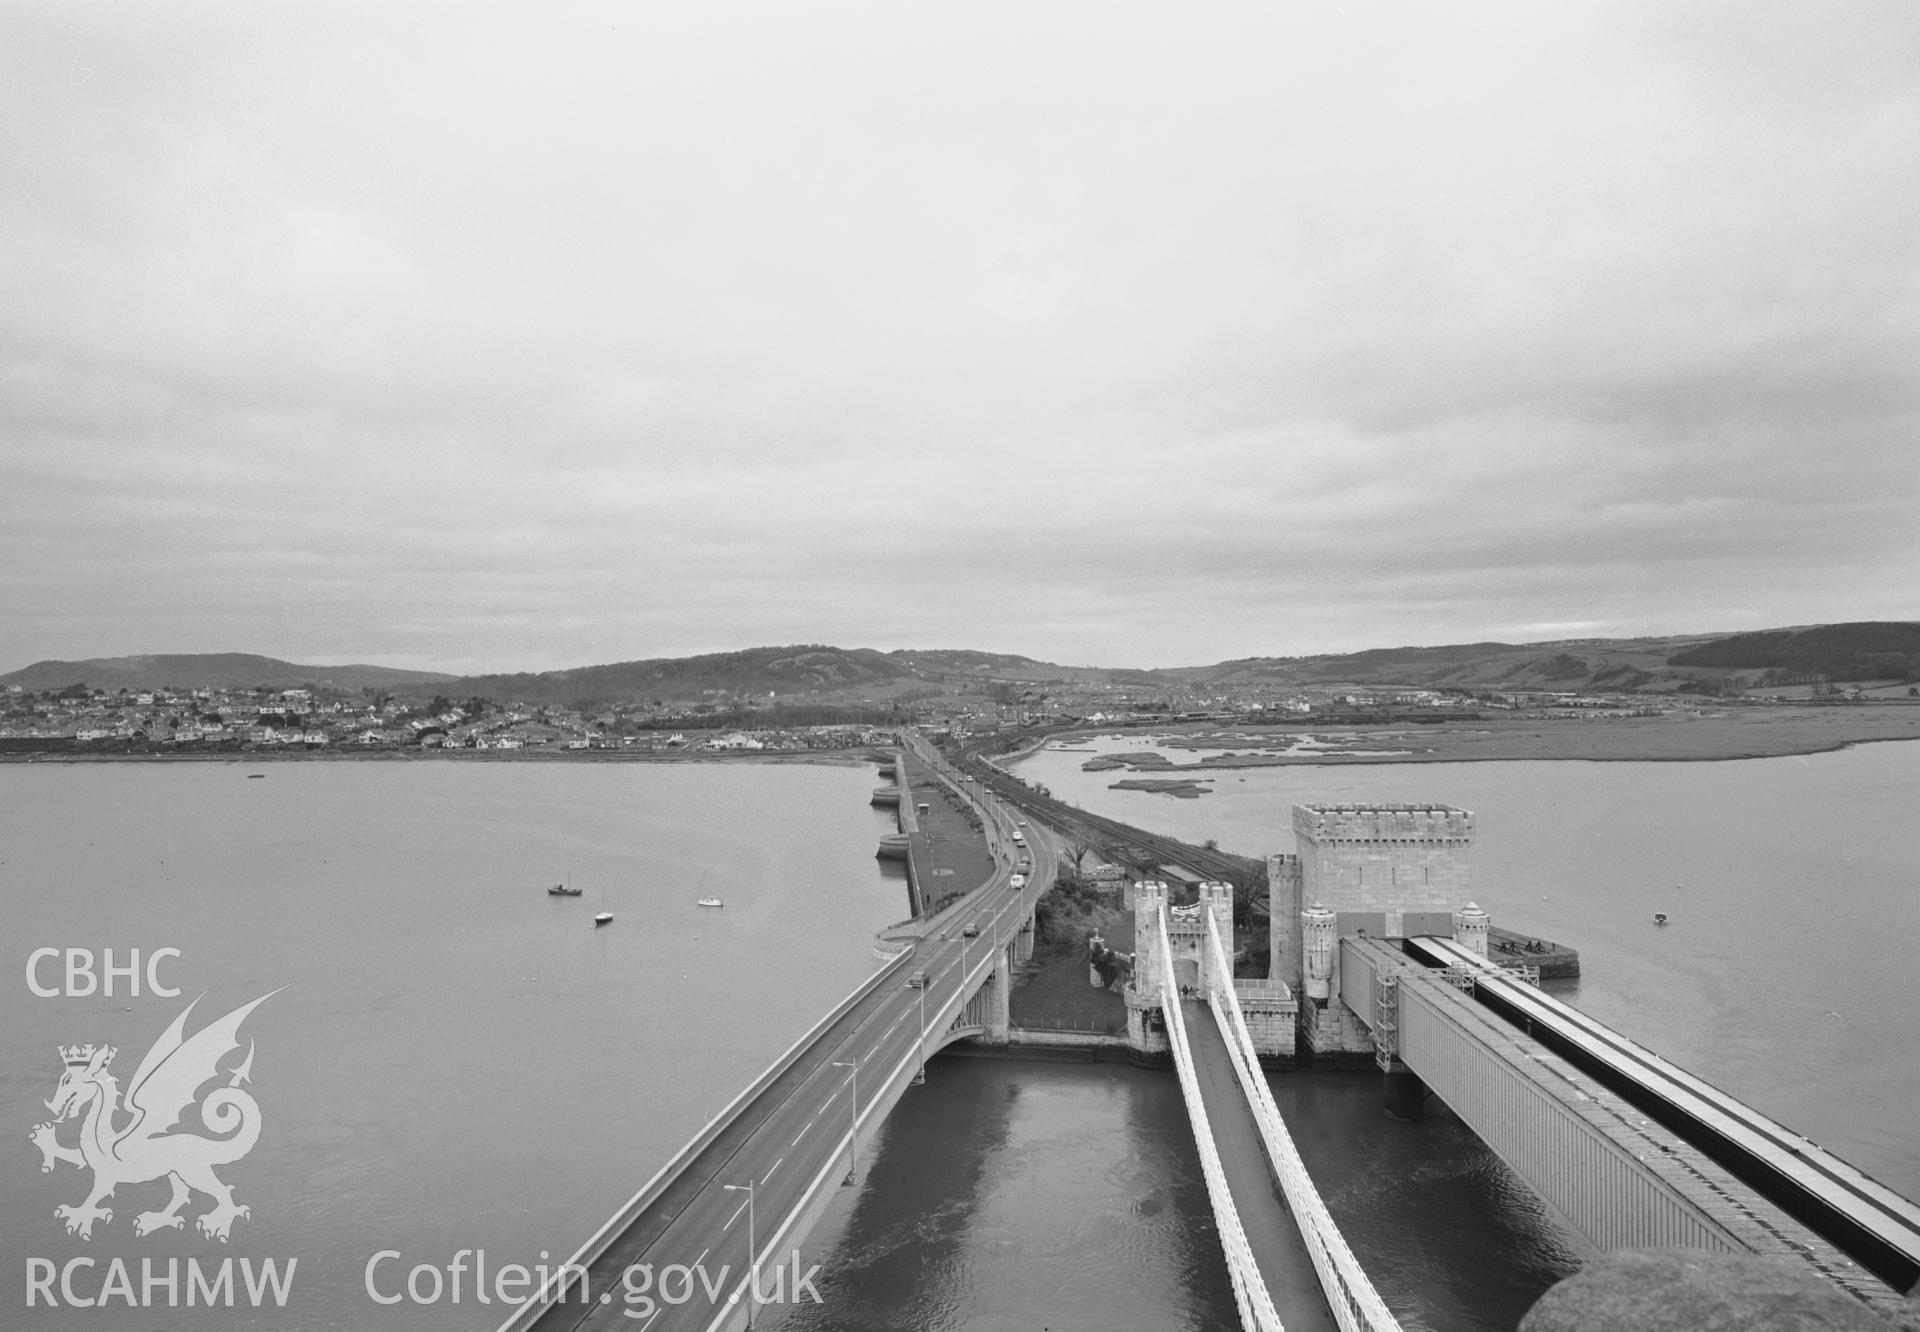 Photographic negative showing view of bridges at Conwy; collated by the former Central Office of Information.